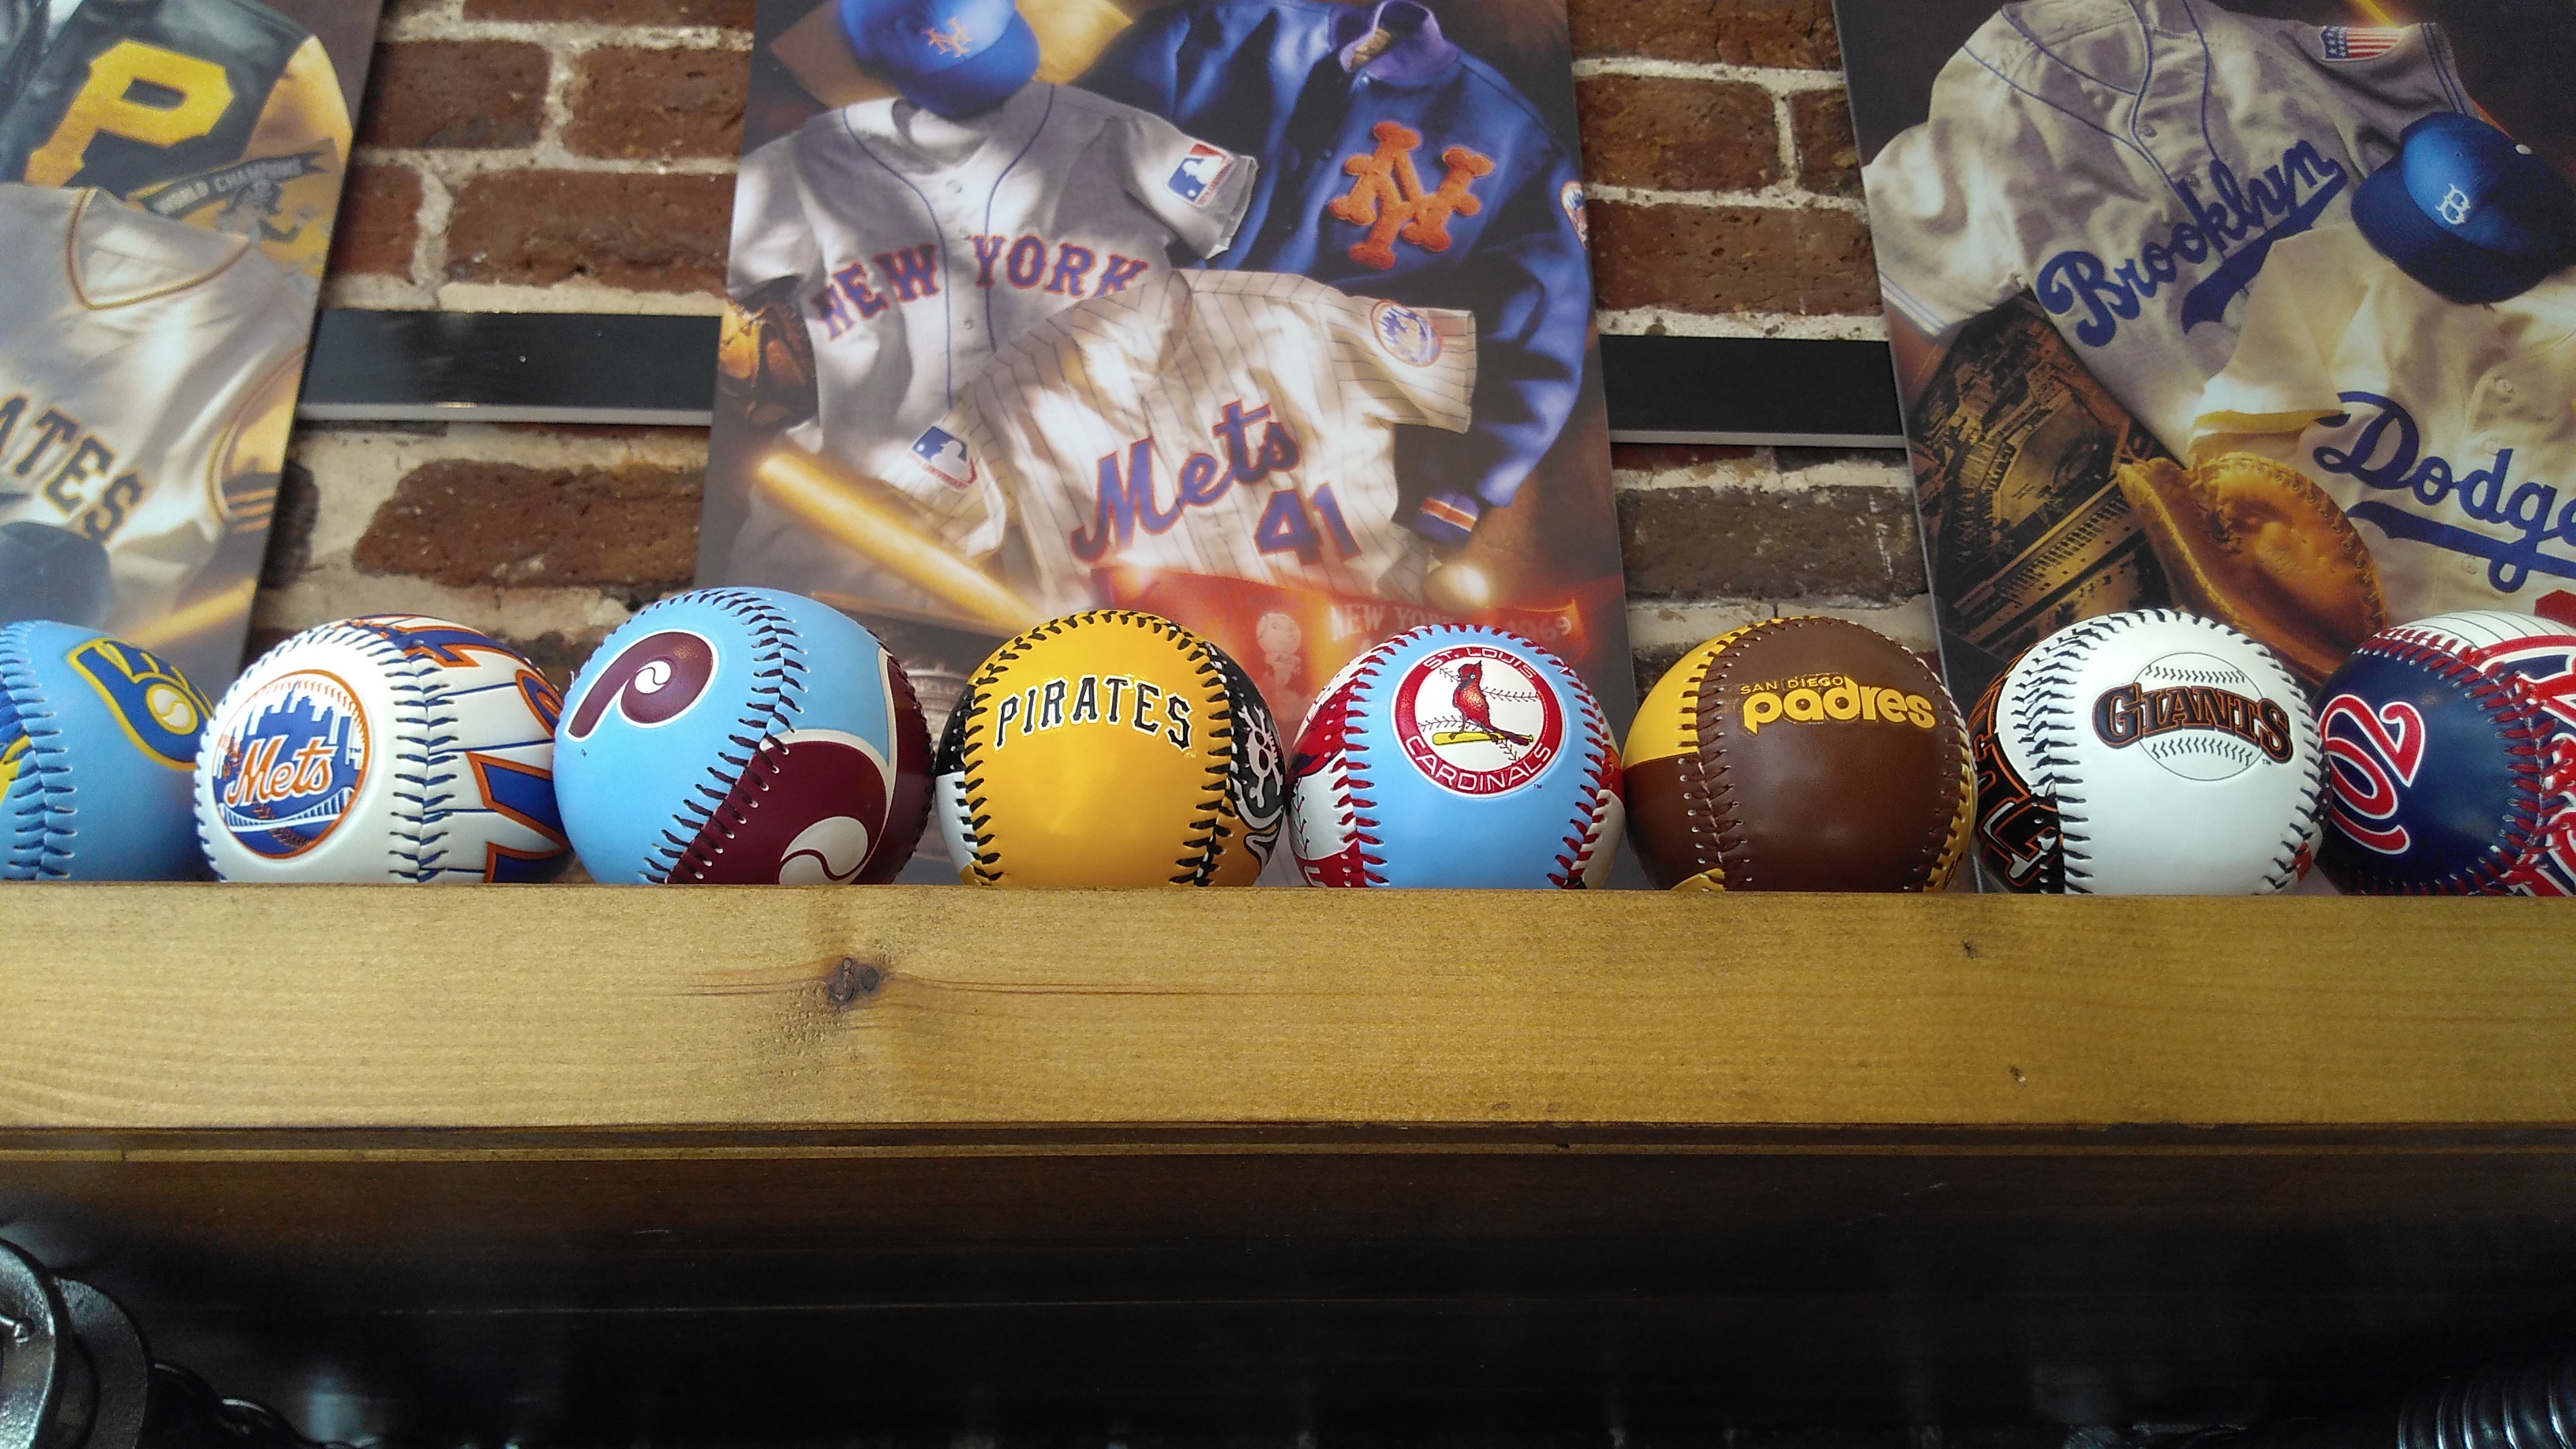 Opening: Major League Baseball tests Europe with pop-up shop in London